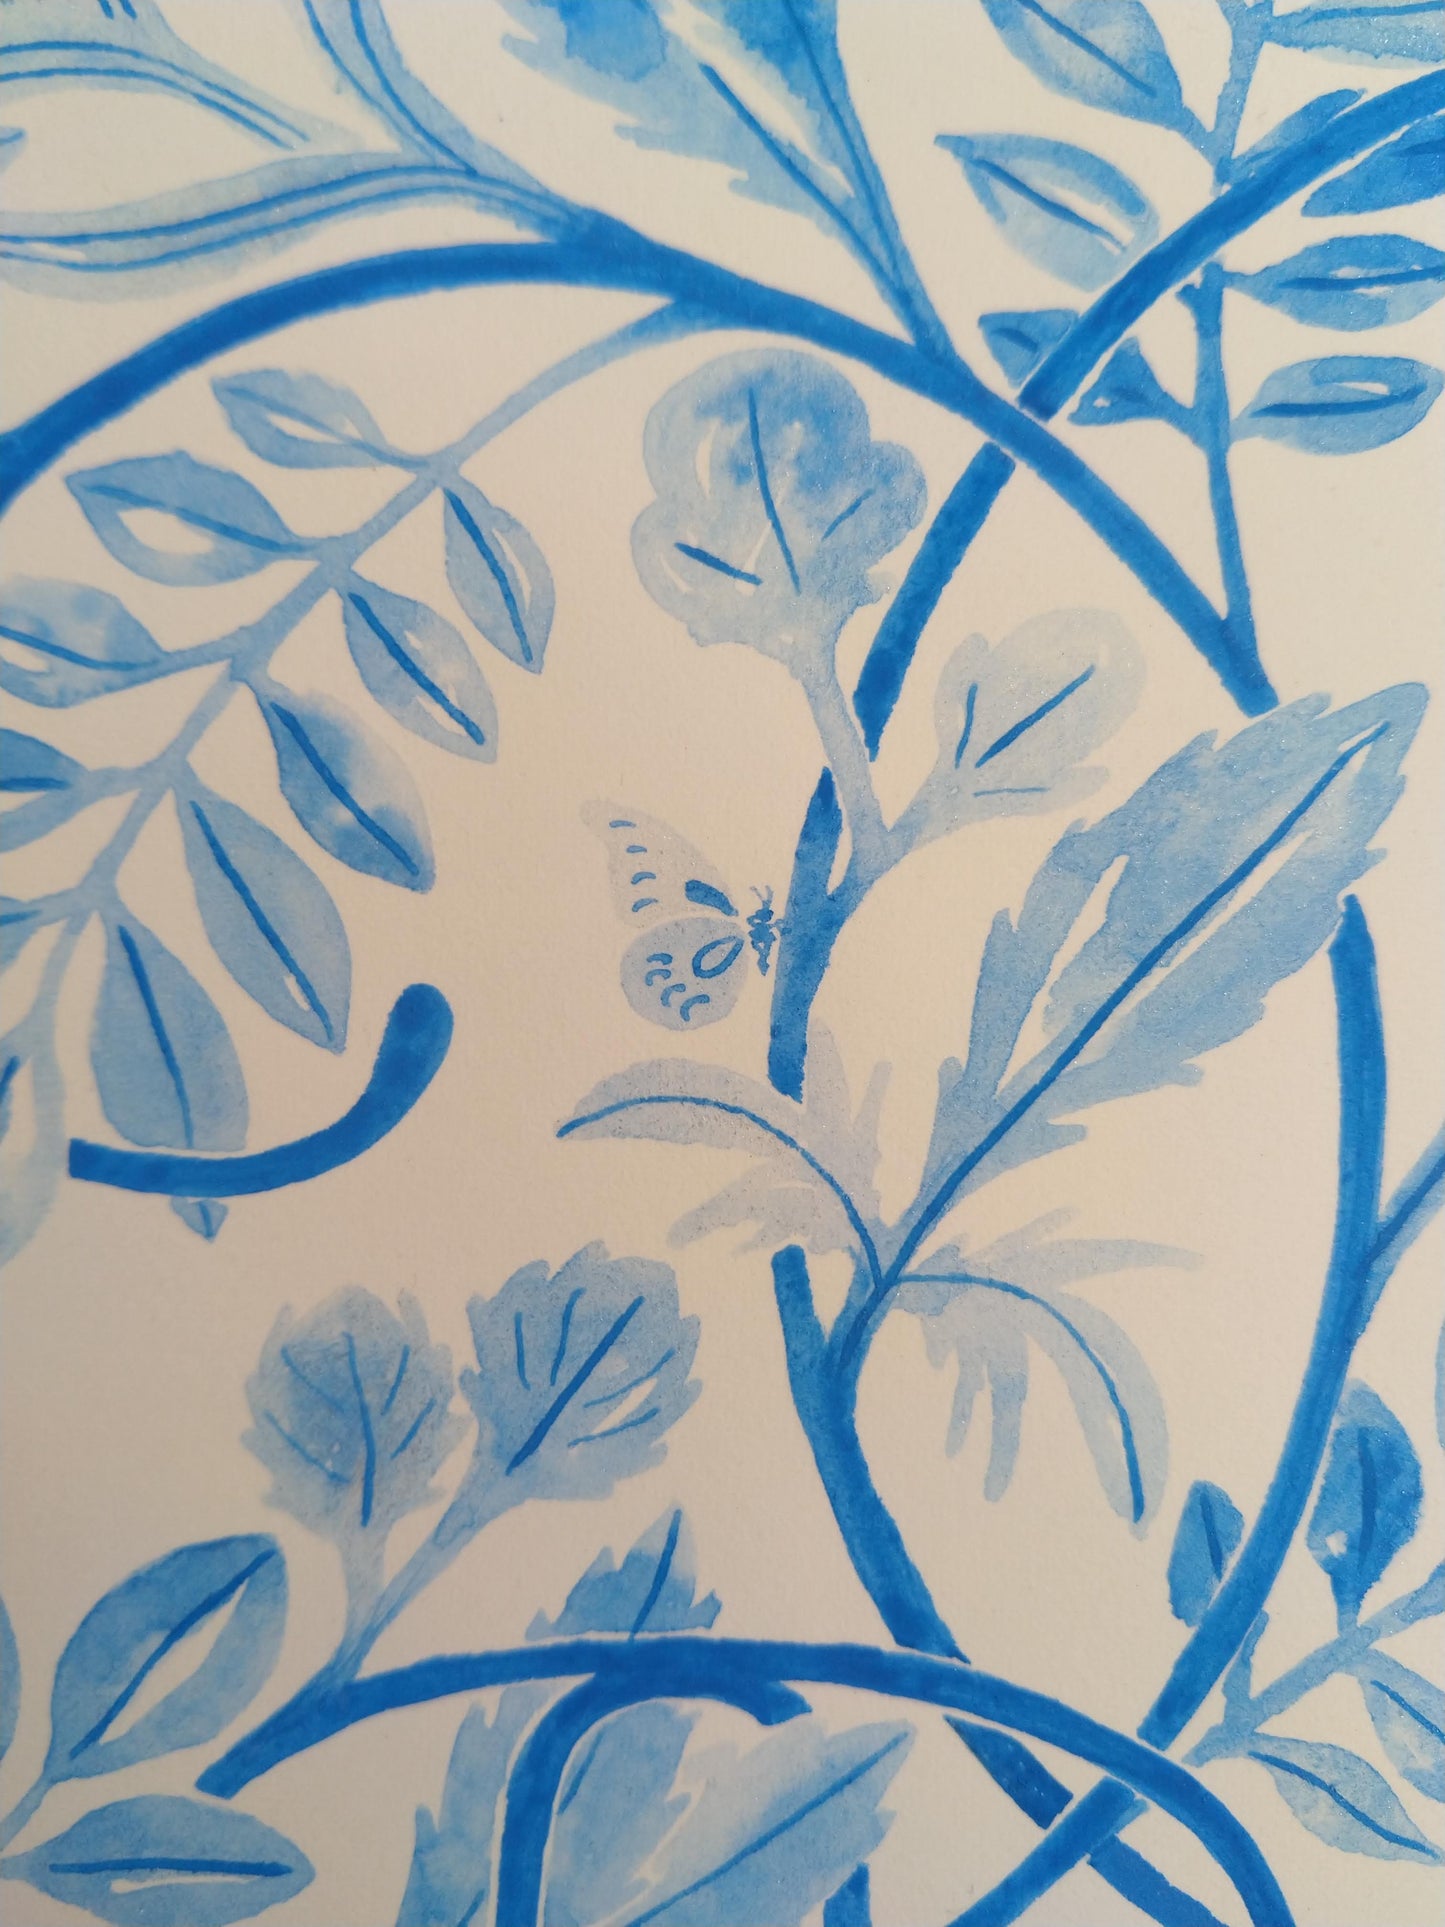 Watercolour Print - Goodness. A study in Cerulean